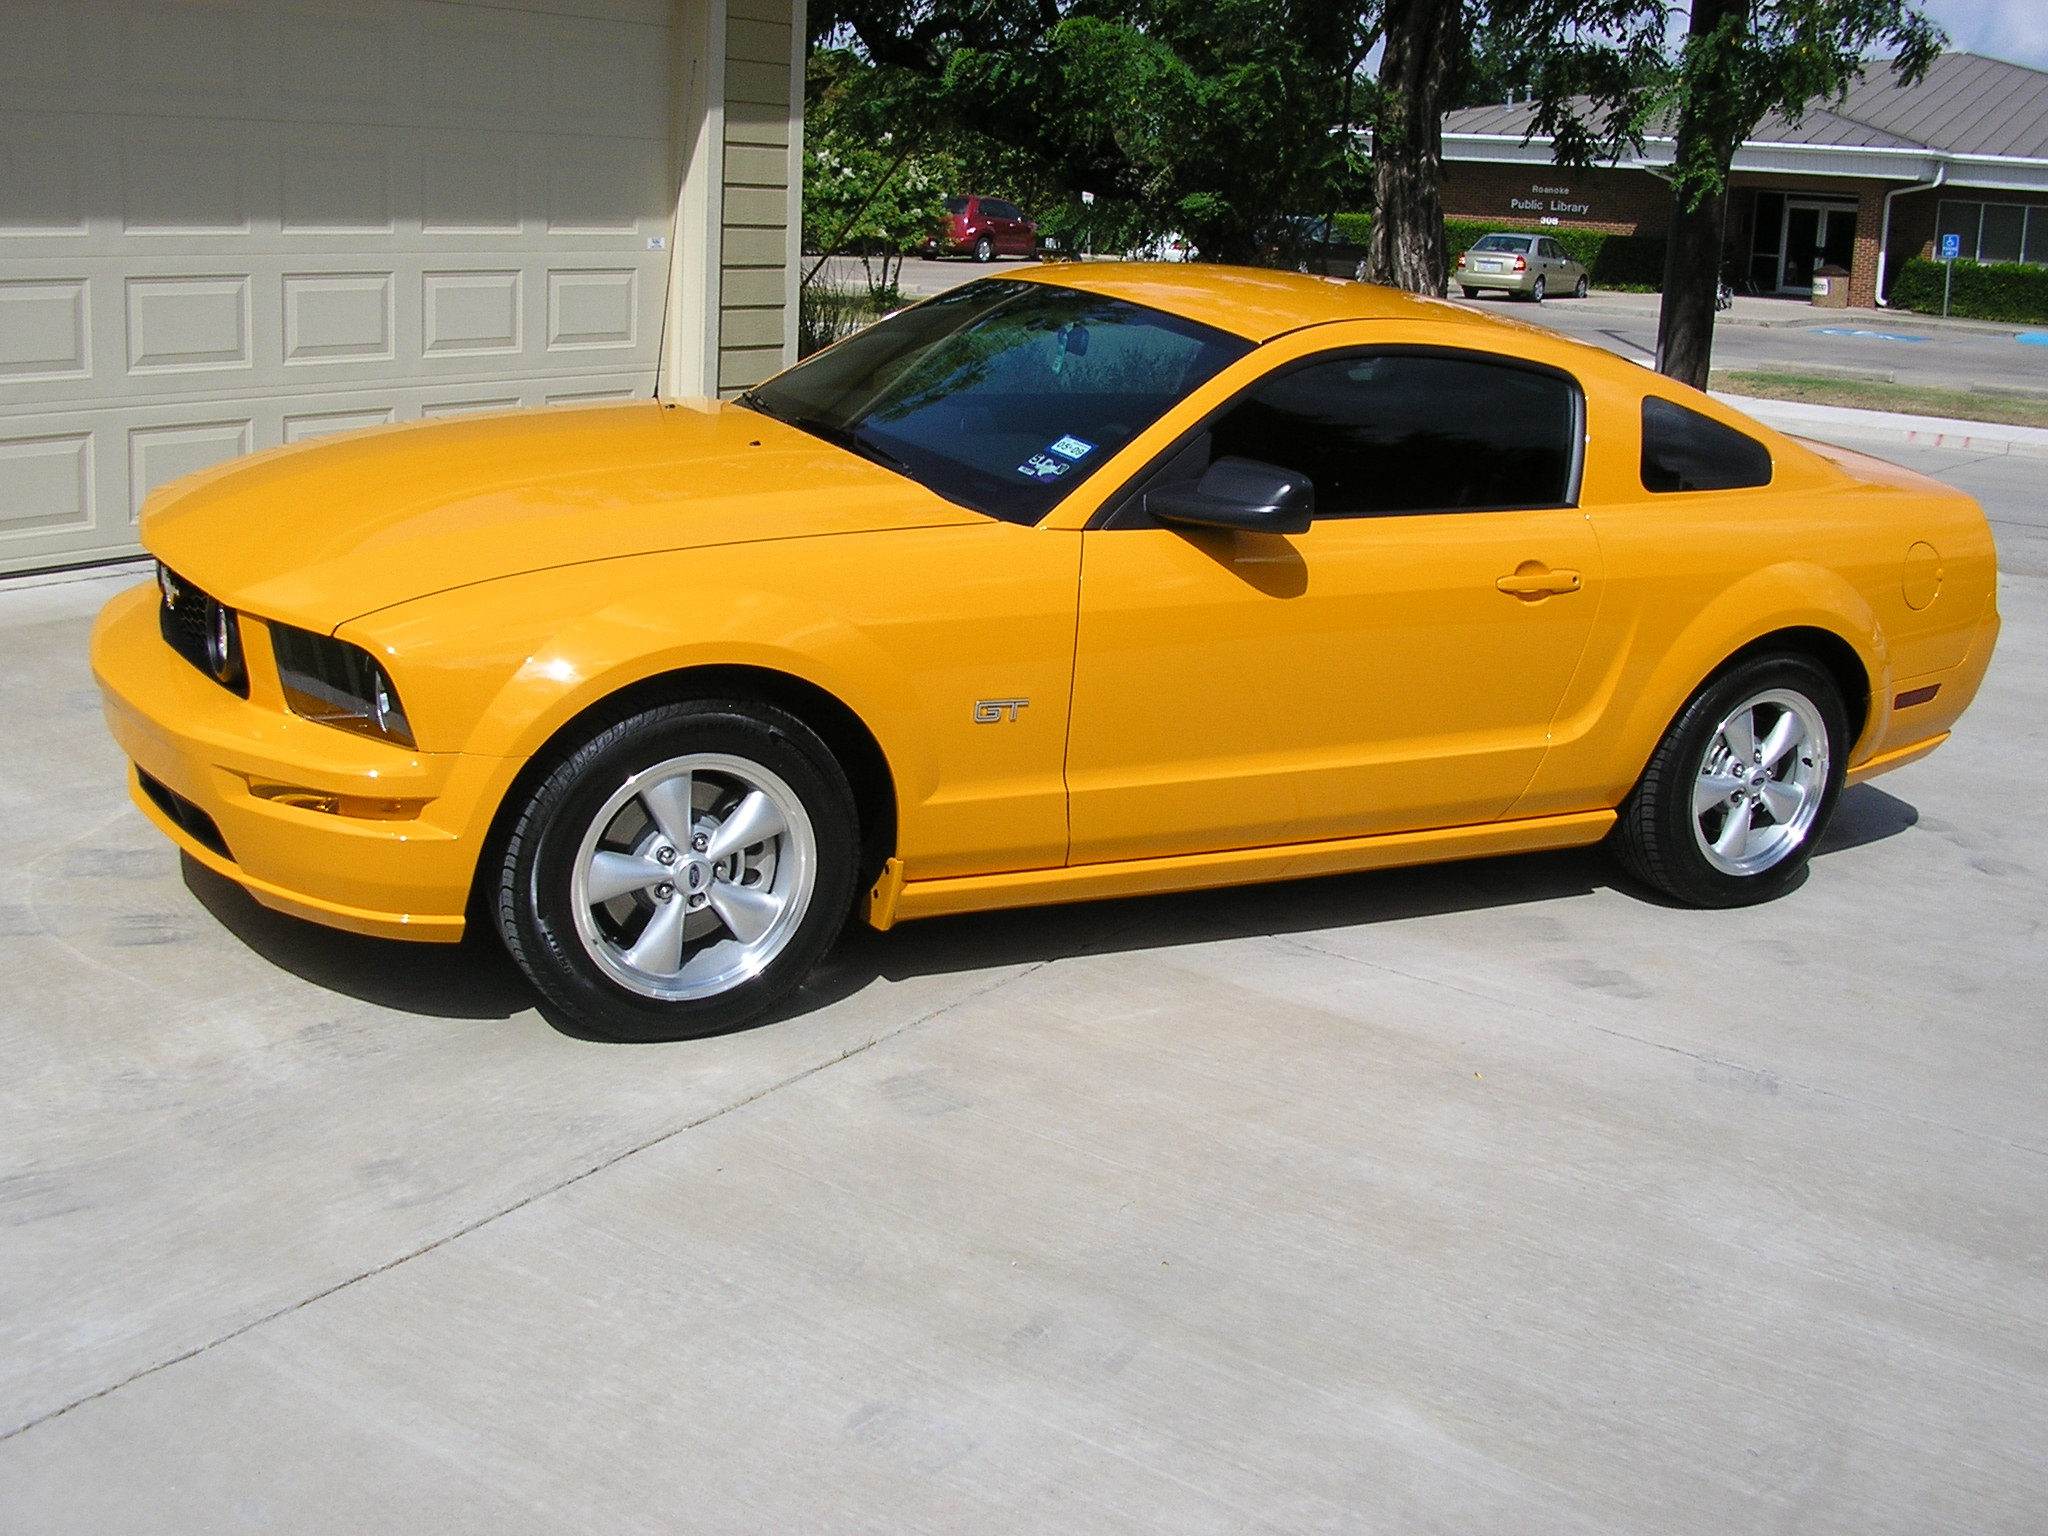 2008 Ford mustang gt quarter mile times #2